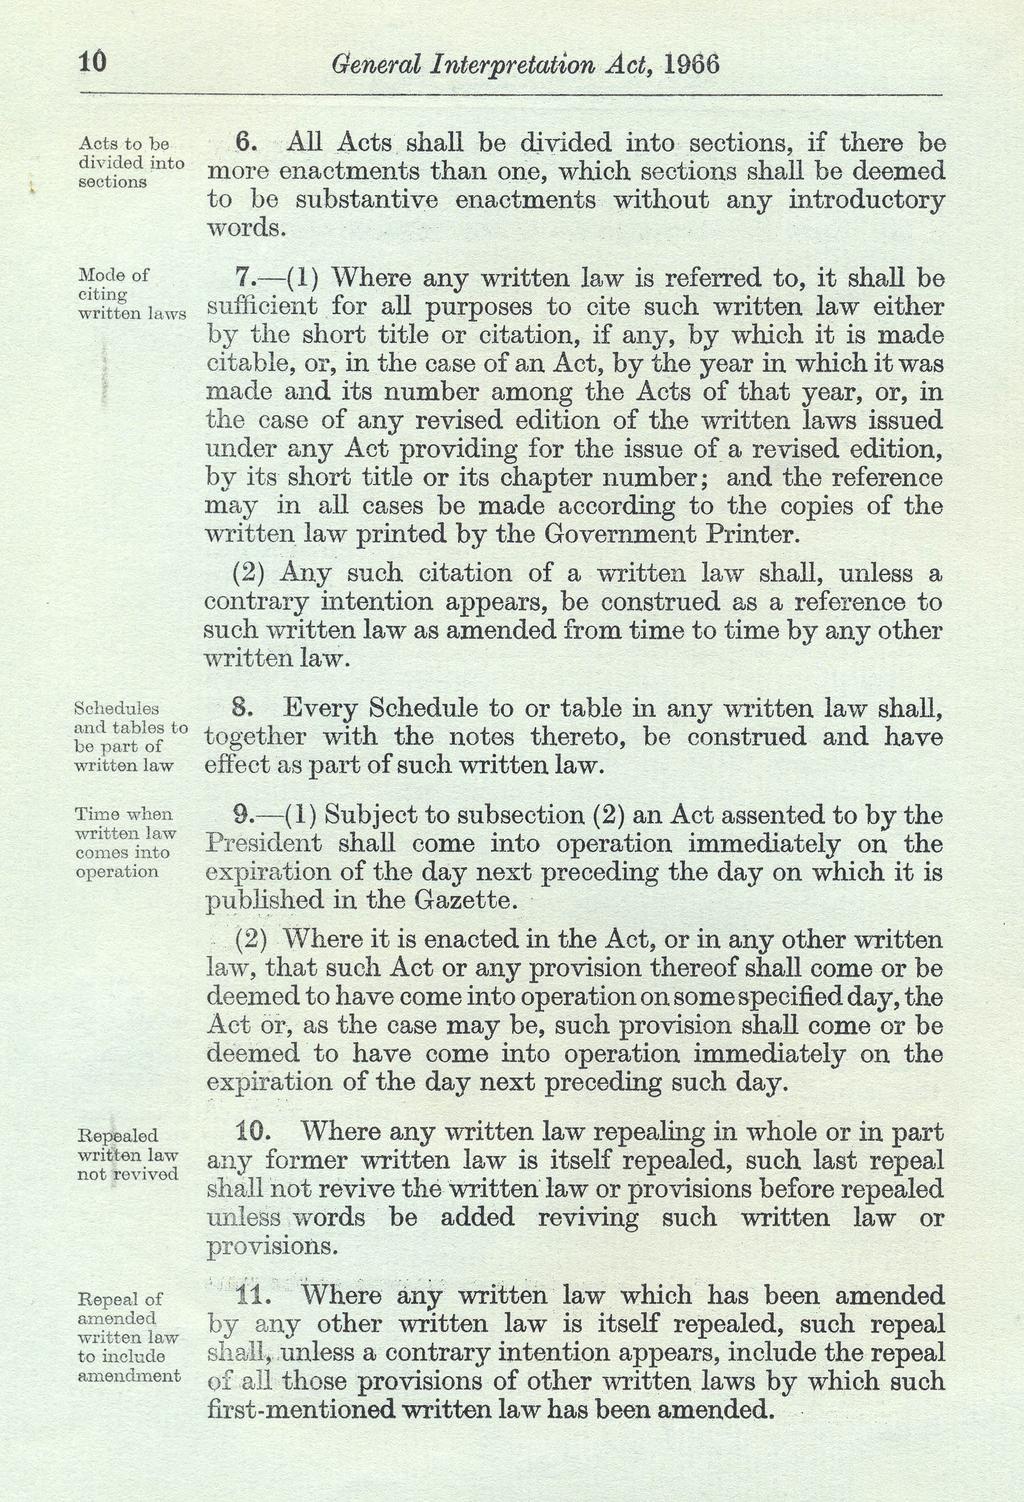 10 General Interpretation Act, 1966 Acts to be divided into sections 6.